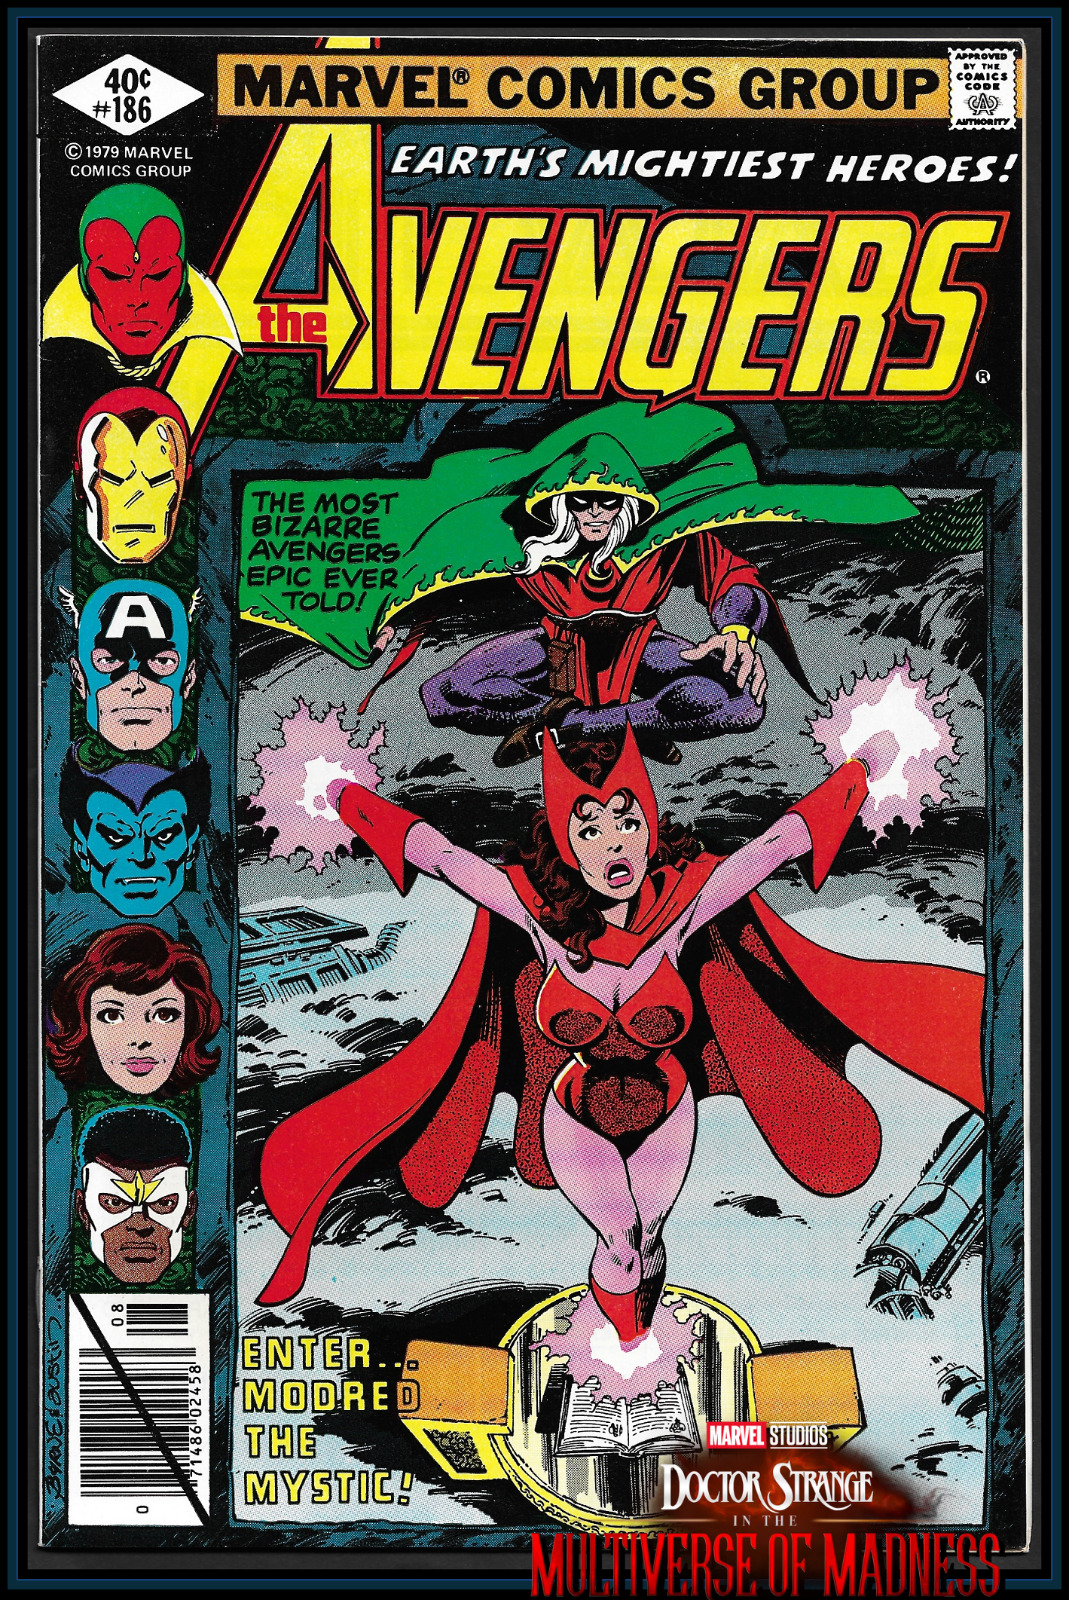 AVENGERS #186 (1979) 1ST CHTHON SCARLET WITCH MULTIVERSE OF MADNESS KEY 9.4 NM